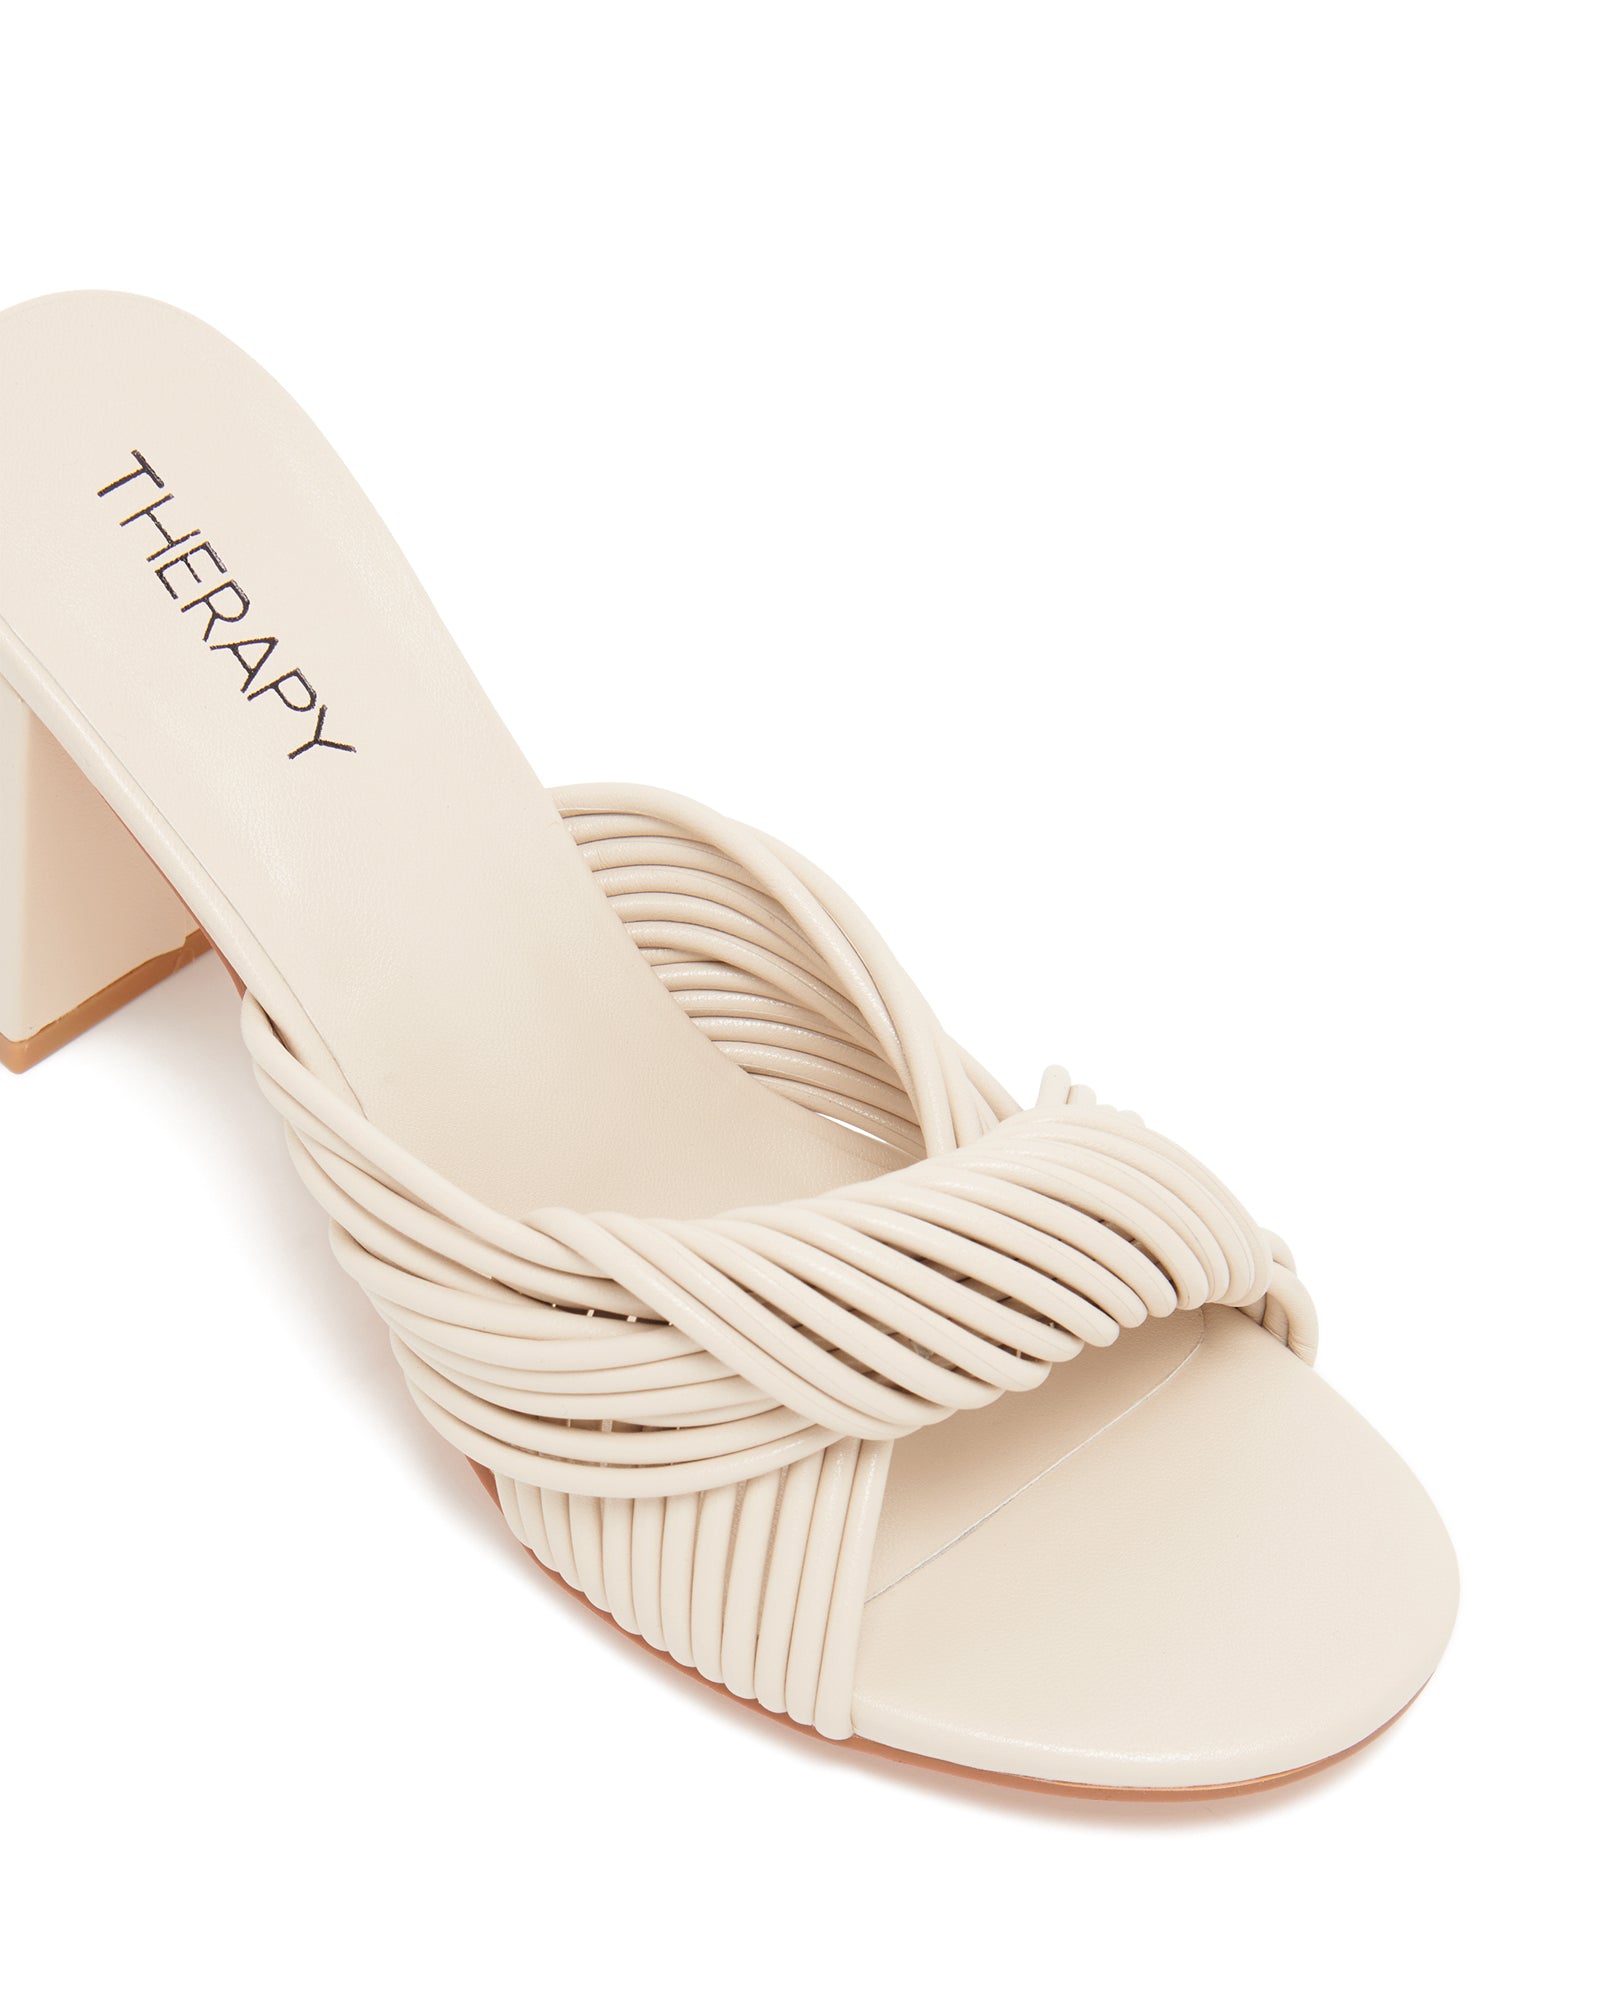 Therapy Shoes Kaylee Bone Smooth | Women's Heels | Sandals | Mules